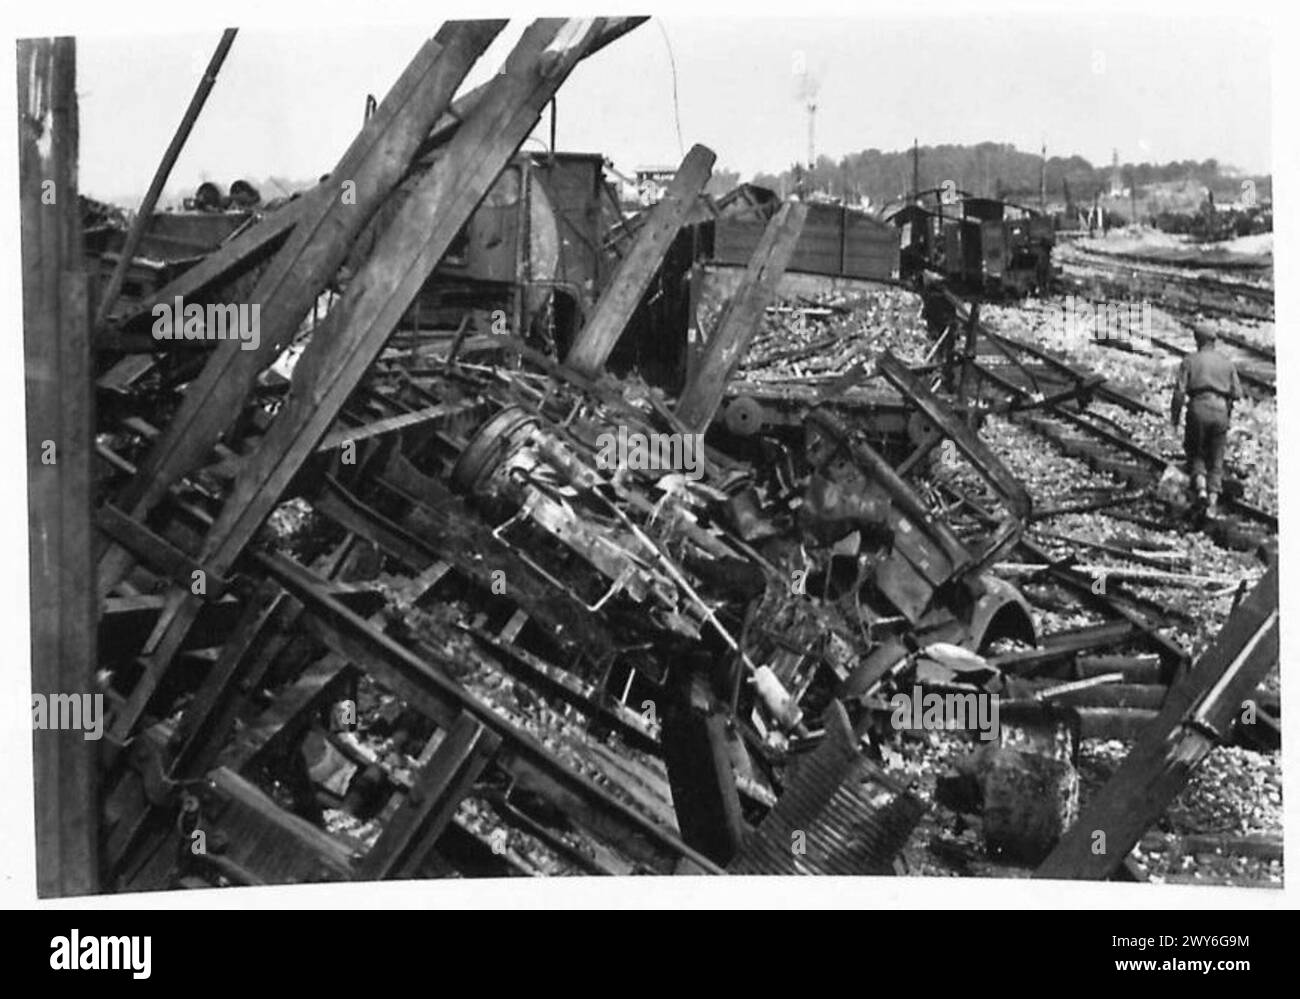 REPAIRING BOMB DAMAGE AT CAEN RAILWAY CENTRE - Damage to the goods wagons and permanent way in the goods yards. , British Army, 21st Army Group Stock Photo